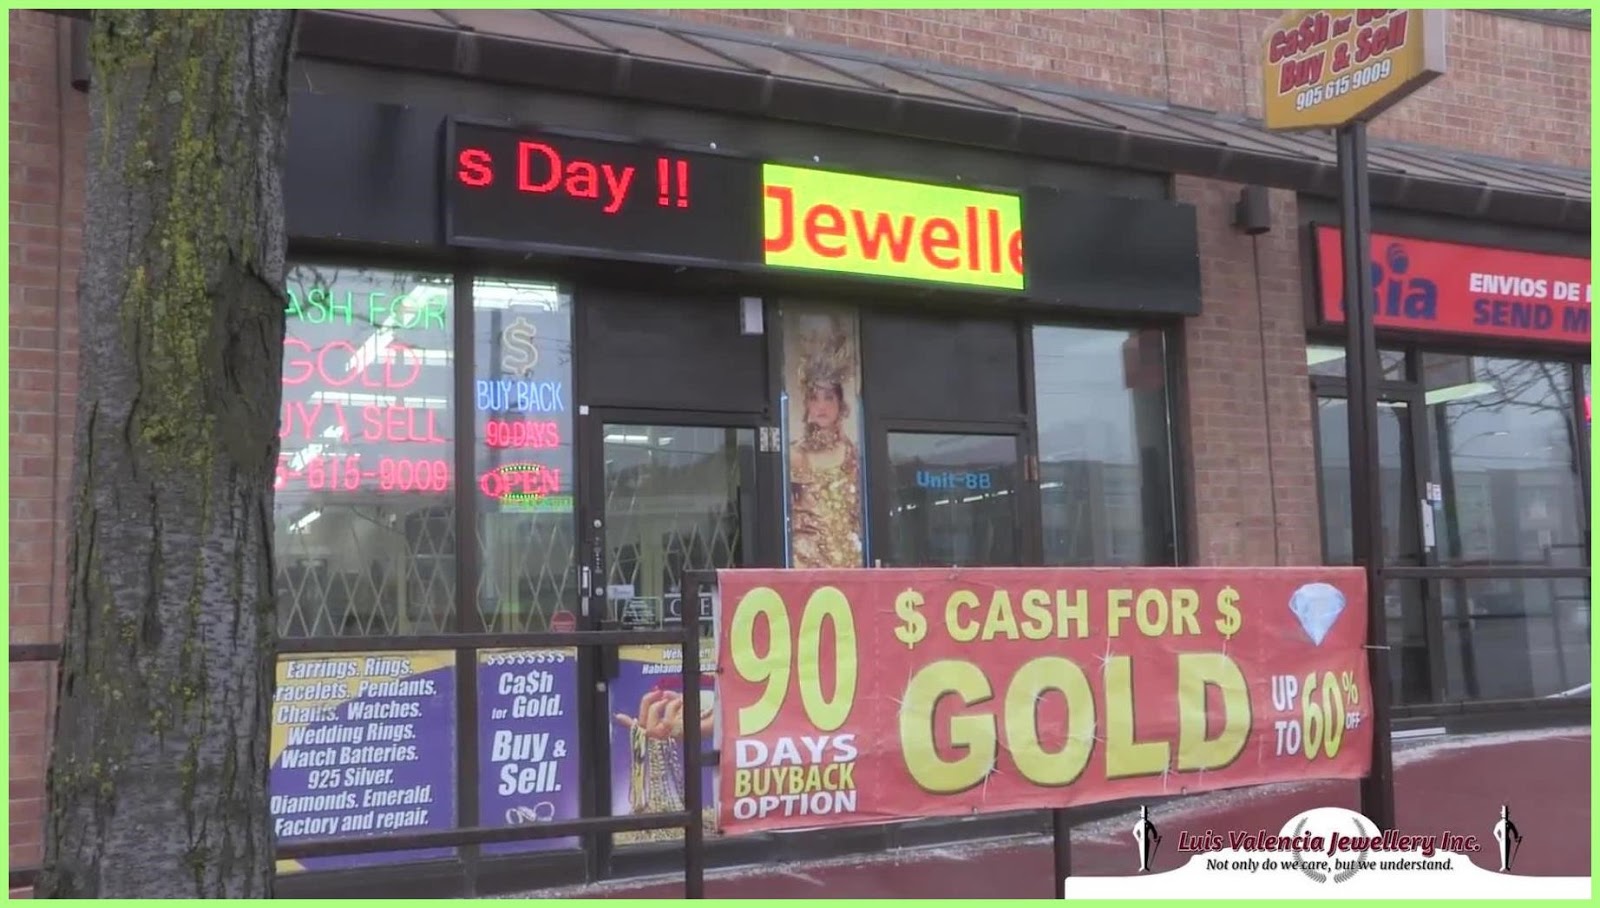 13 City Pawn Brokers Kitchener Jewellery Buyers in Simcoe ON YellowPagescaÃ¢Â„Â¢ City,Pawn,Brokers,Kitchener